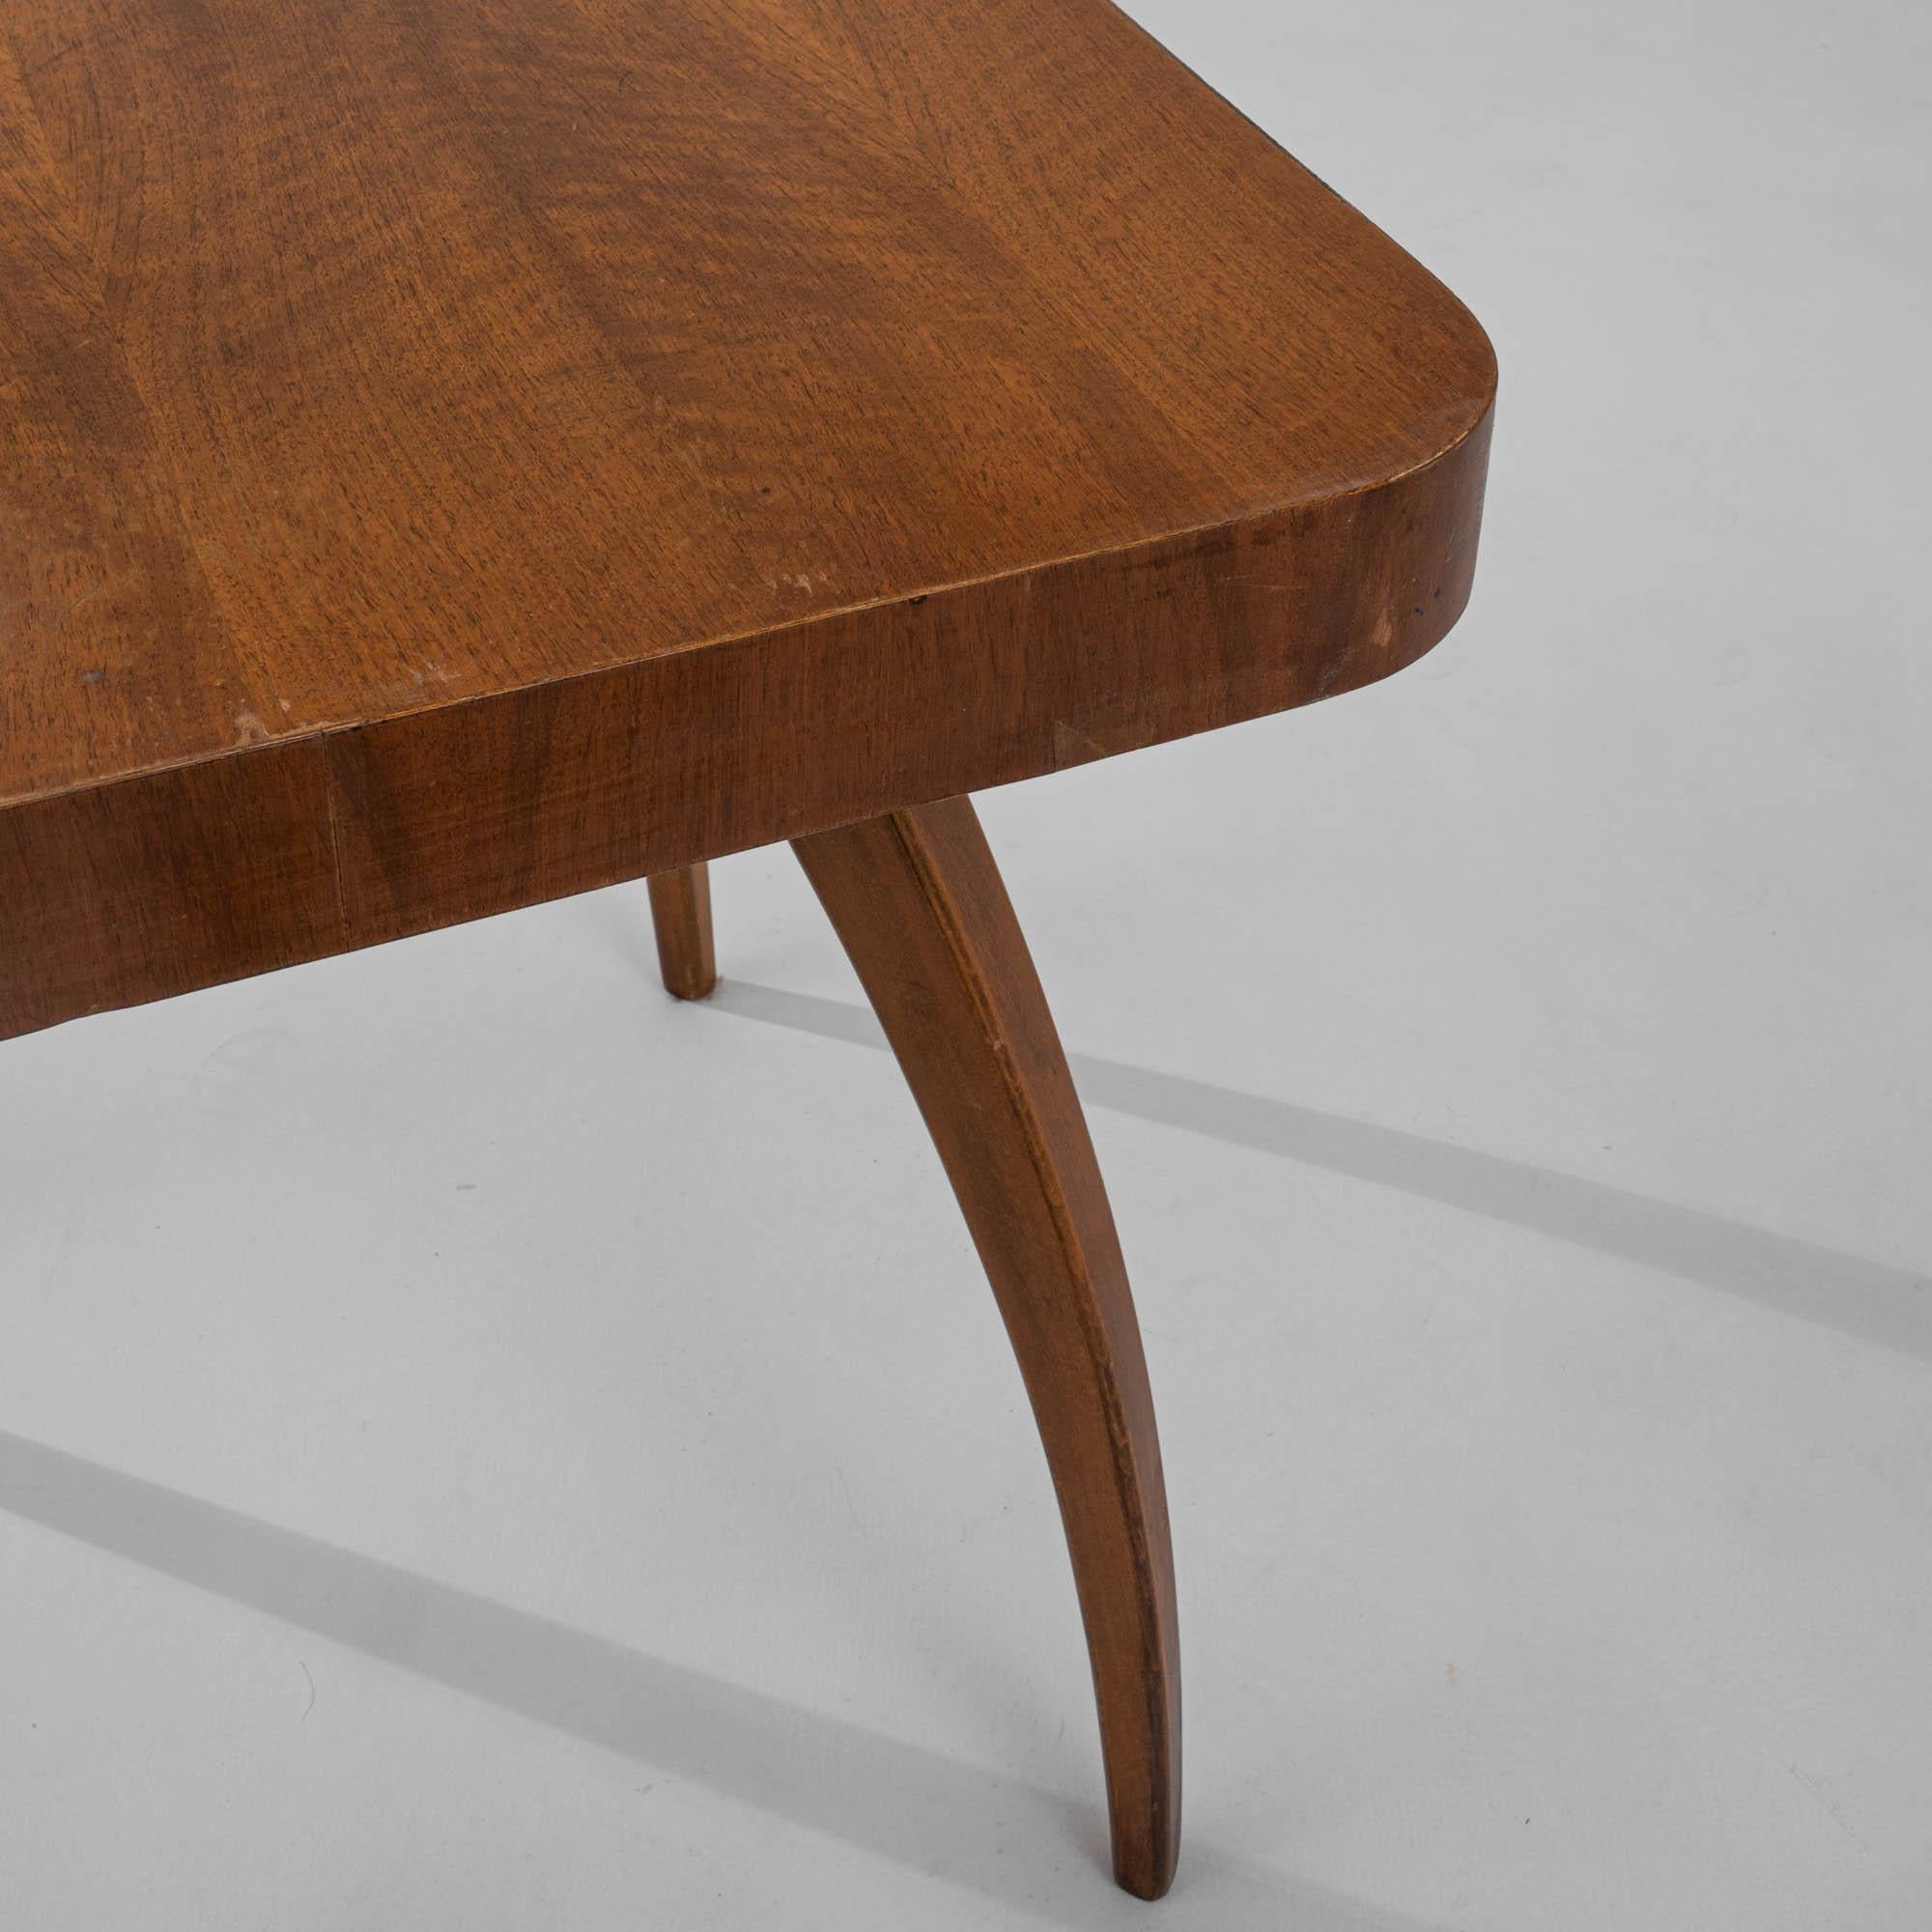 20th Century H259 Spider Table by Jindrich Halabala For Sale